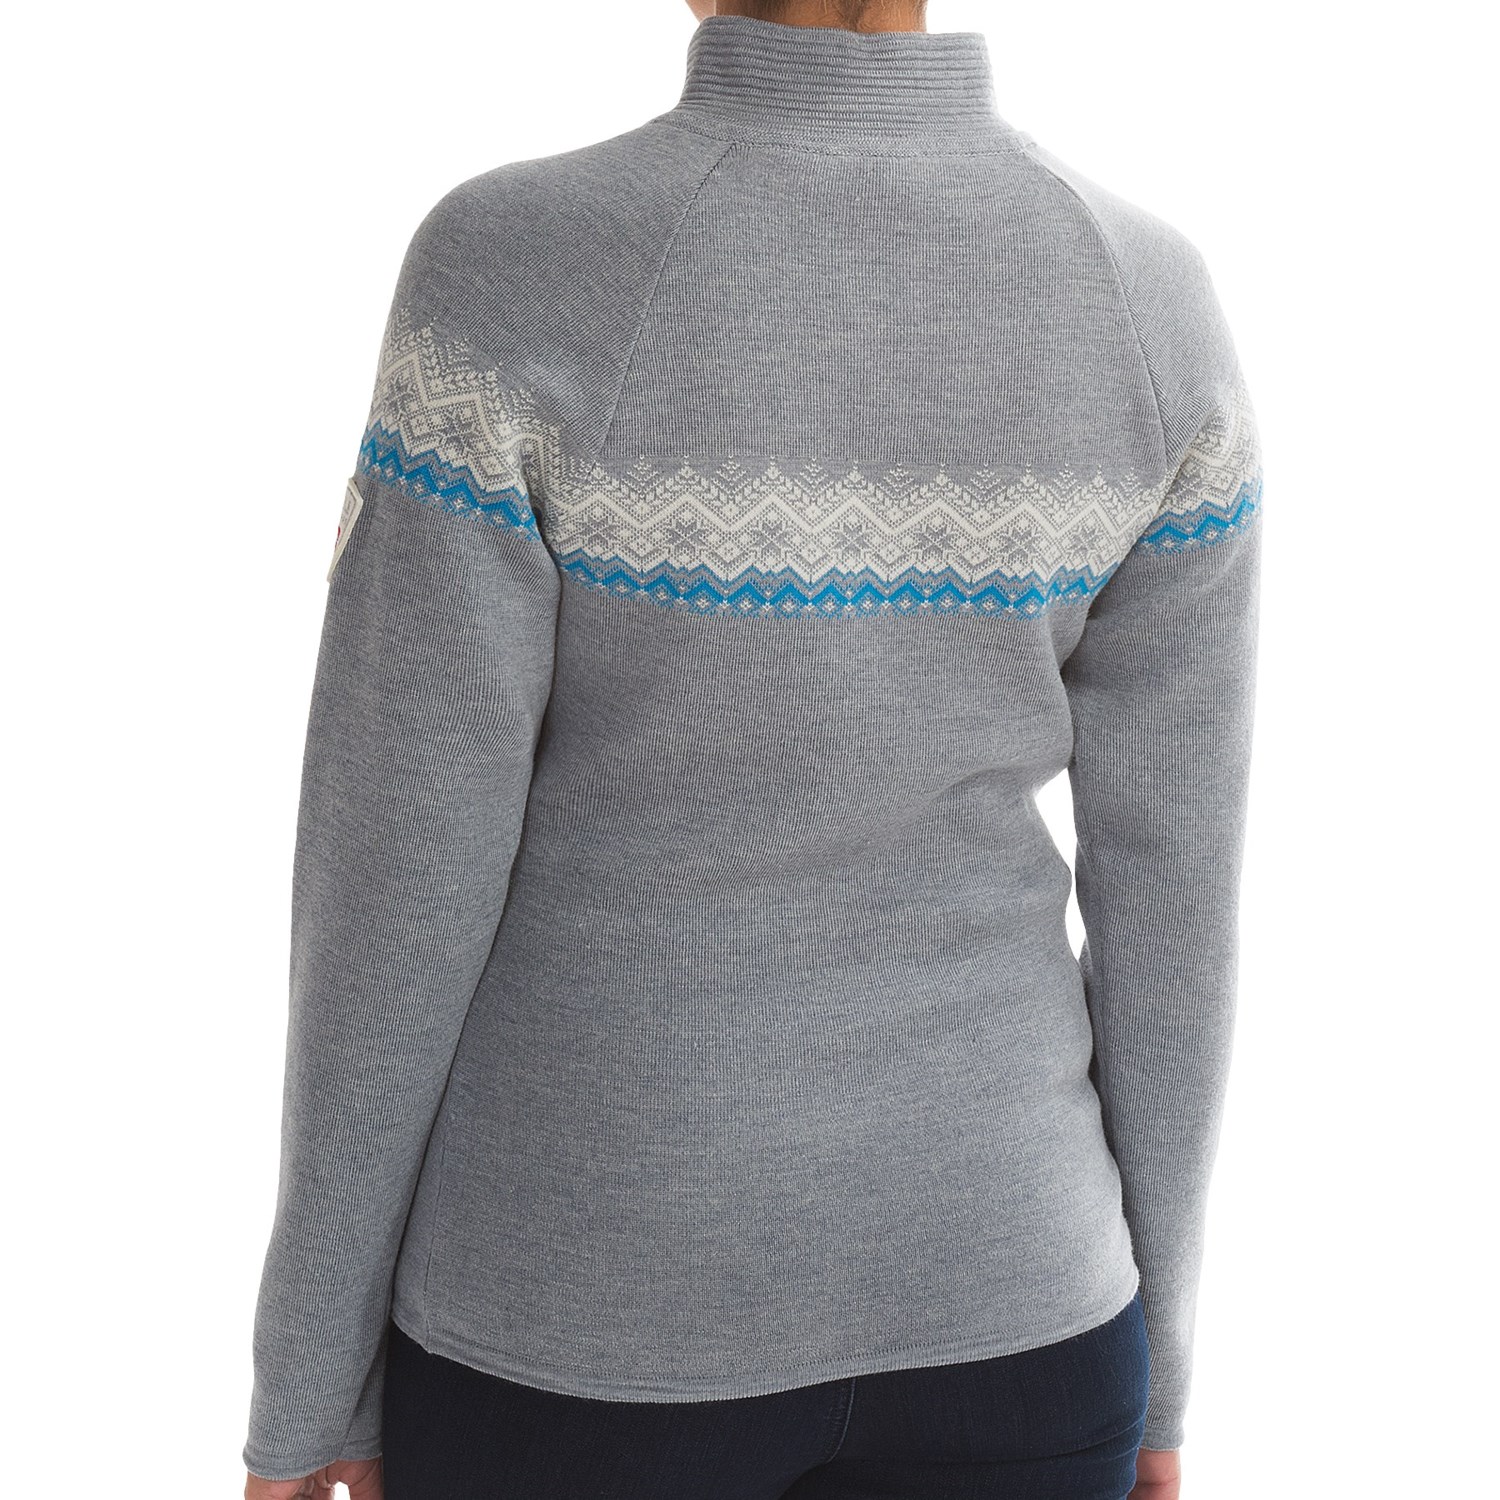 Dale of Norway Calgary Sweater (For Women) - Save 57%